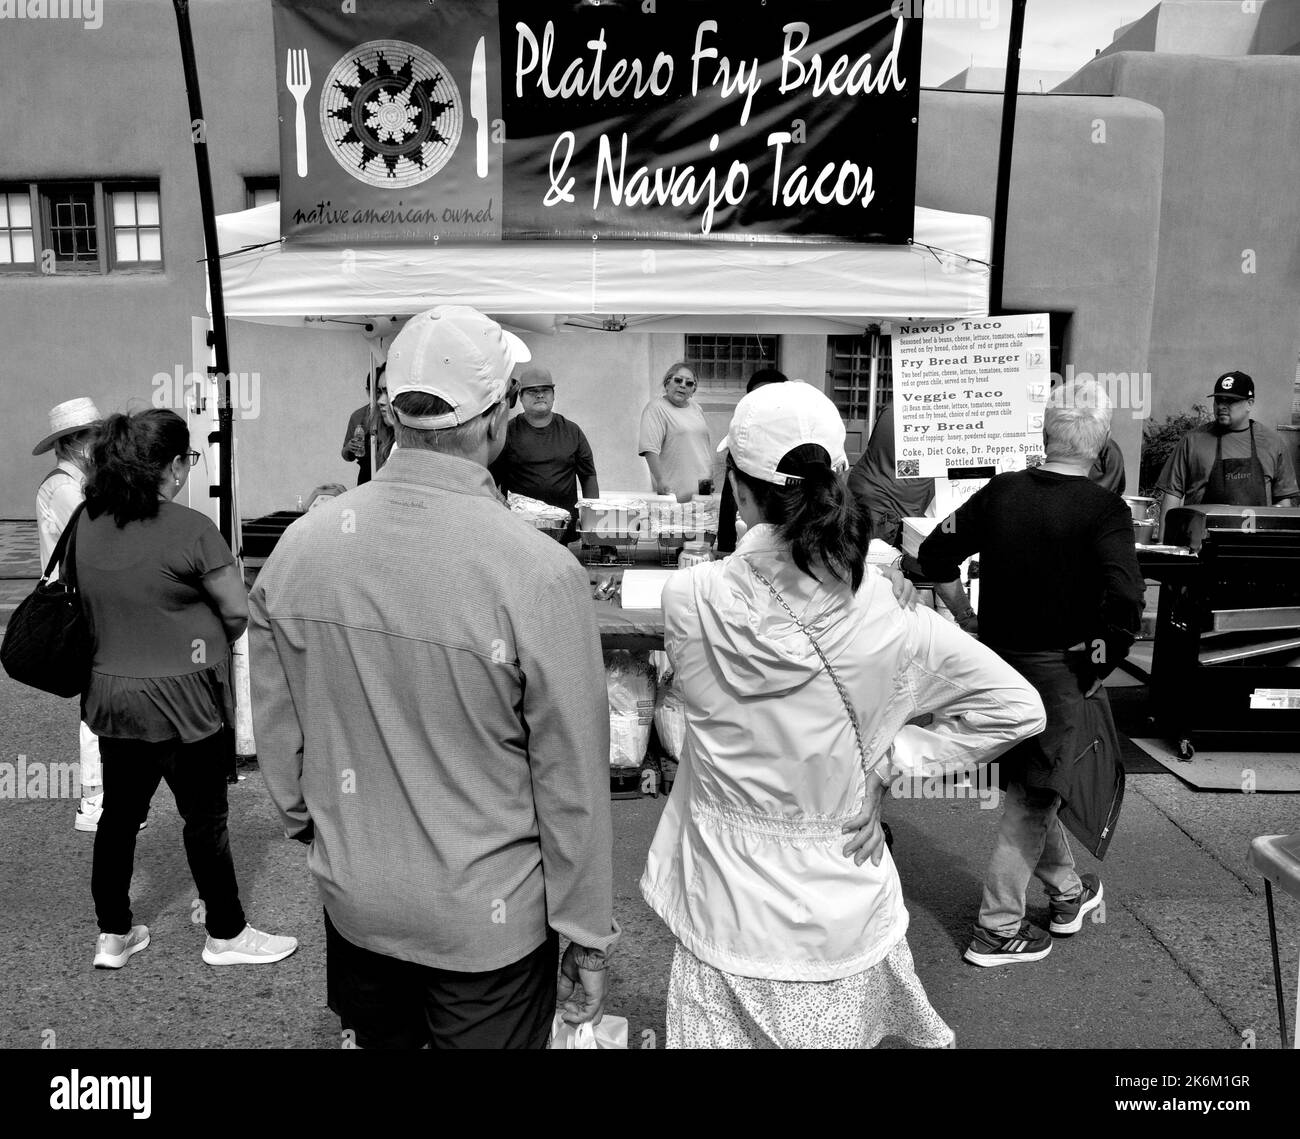 Customers buy lunch at a Native American-owned food vendor at an outdoor festival in Santa Fe, New Mexico. Stock Photo